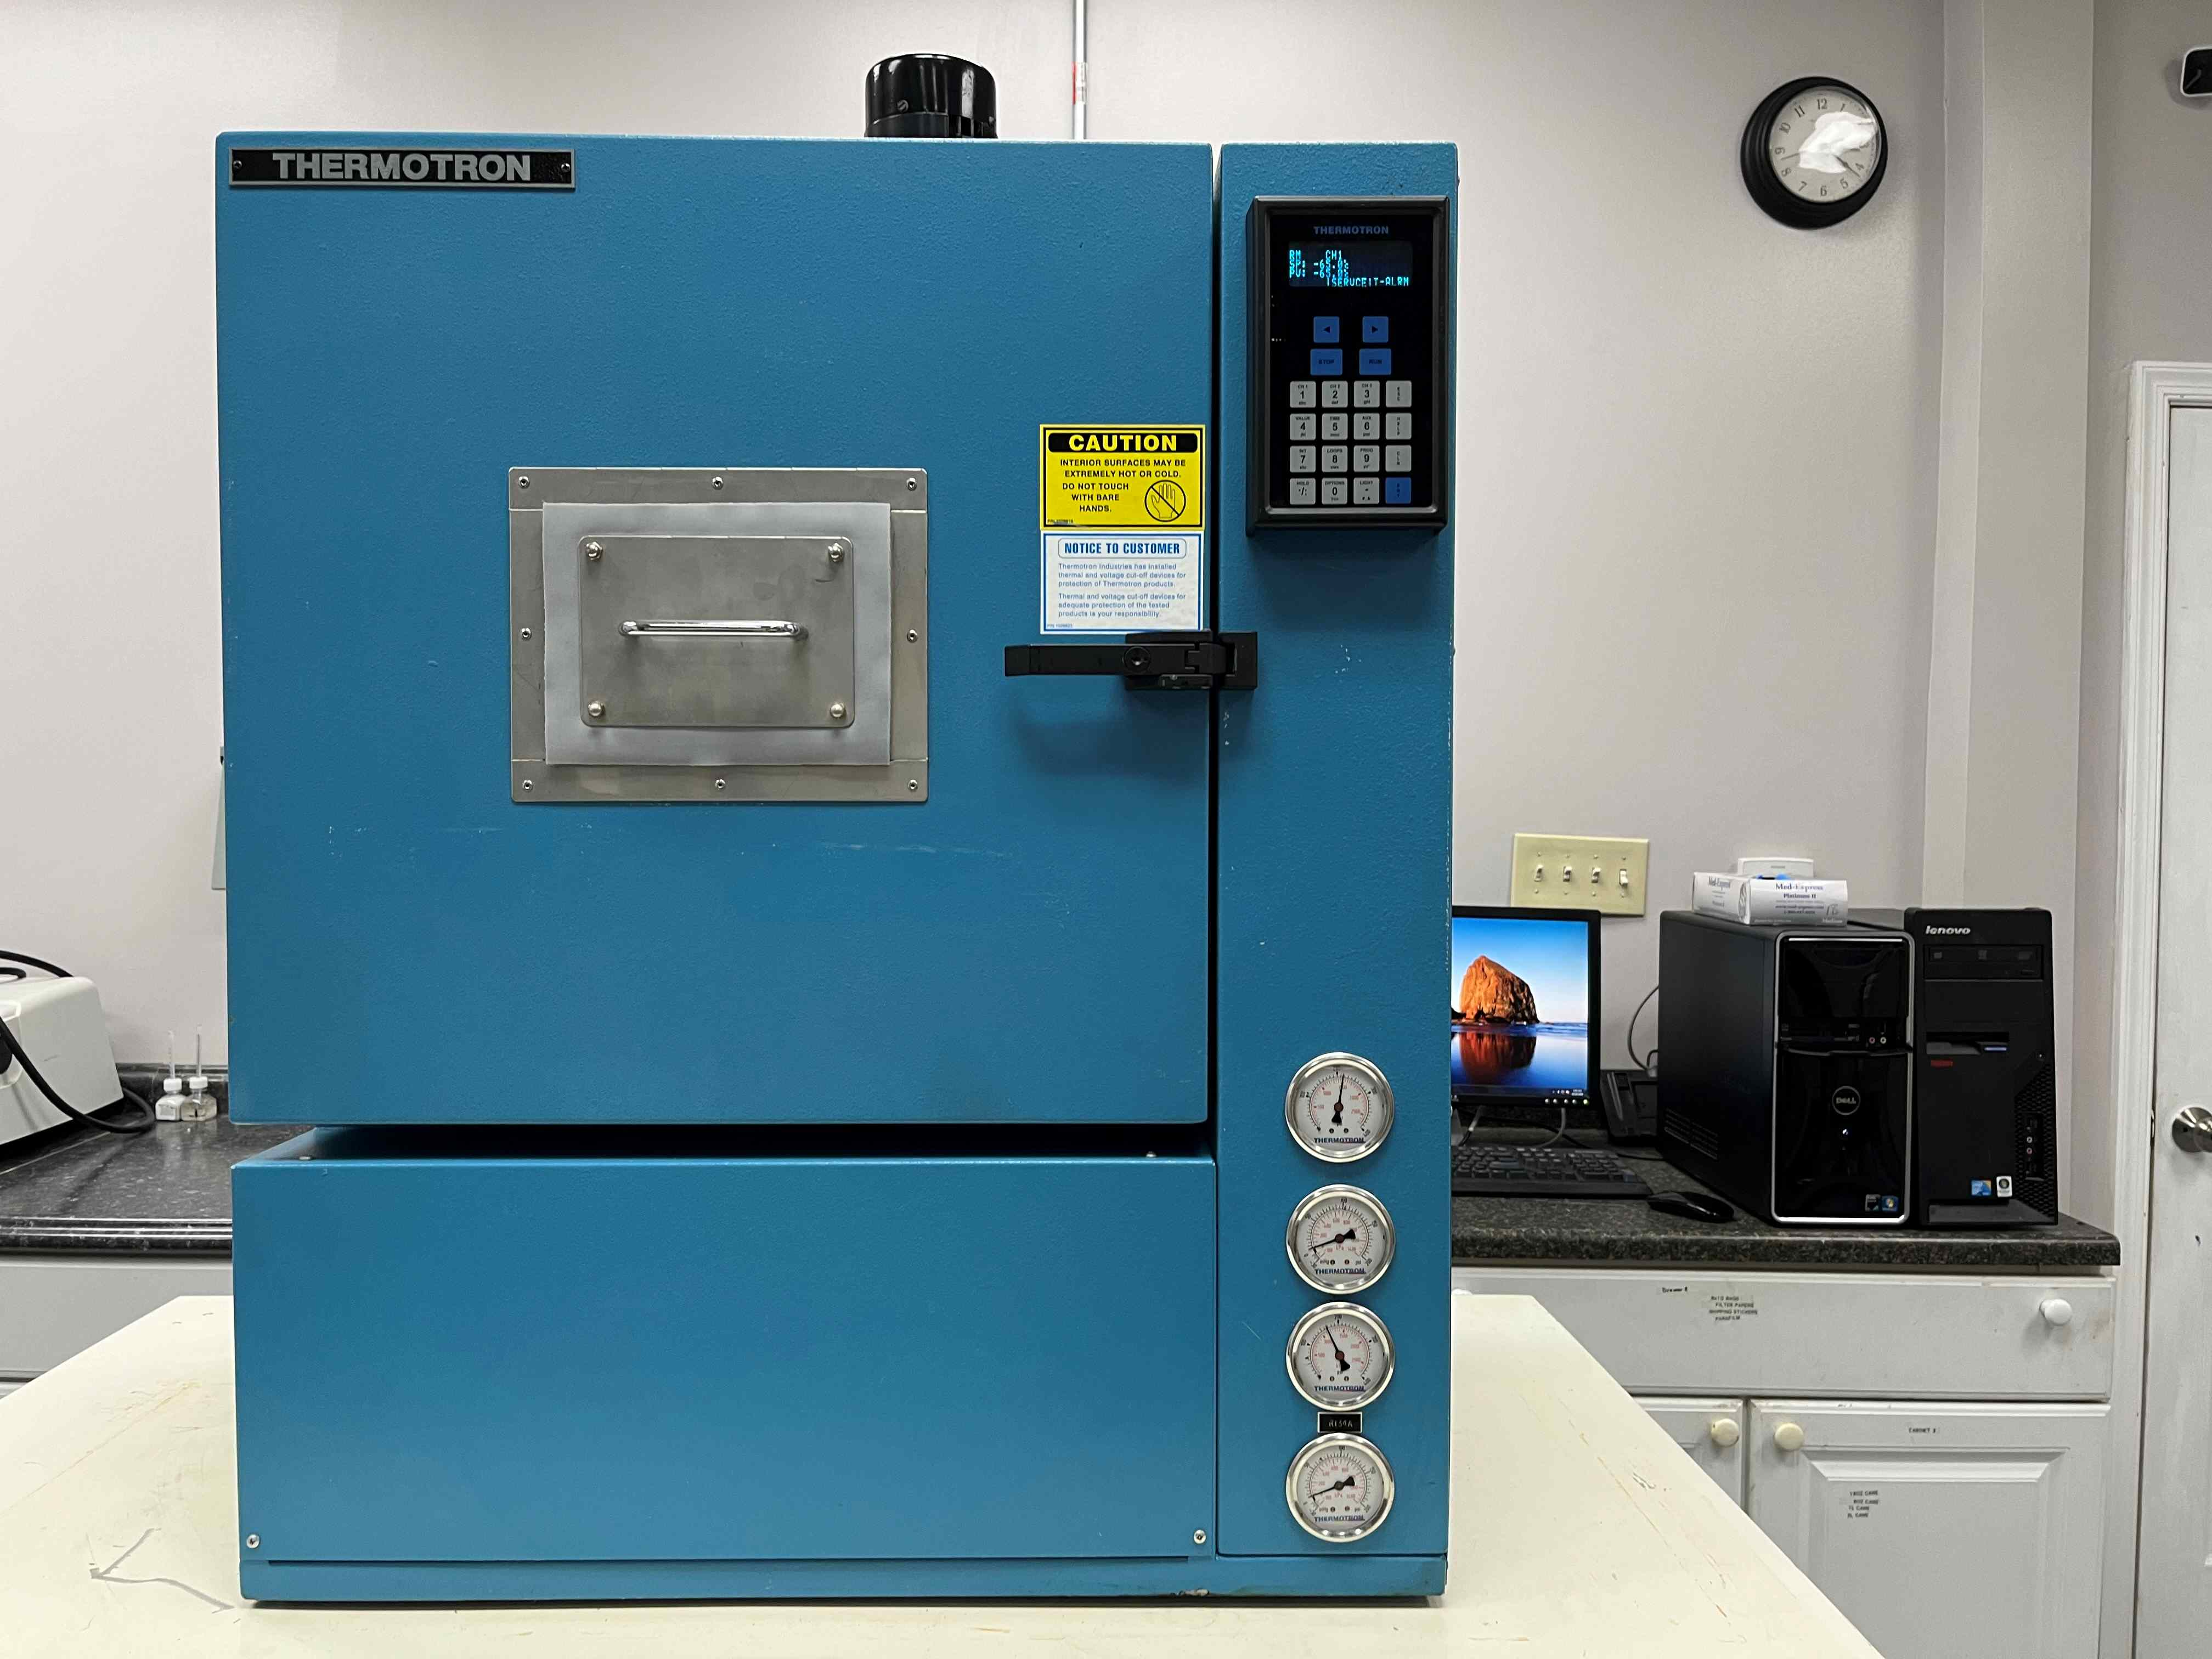 Environmental Chamber - Fully Working Thermotron S-1.2-3800 Benchtop Chamber (-65C to +170C) - Warranty